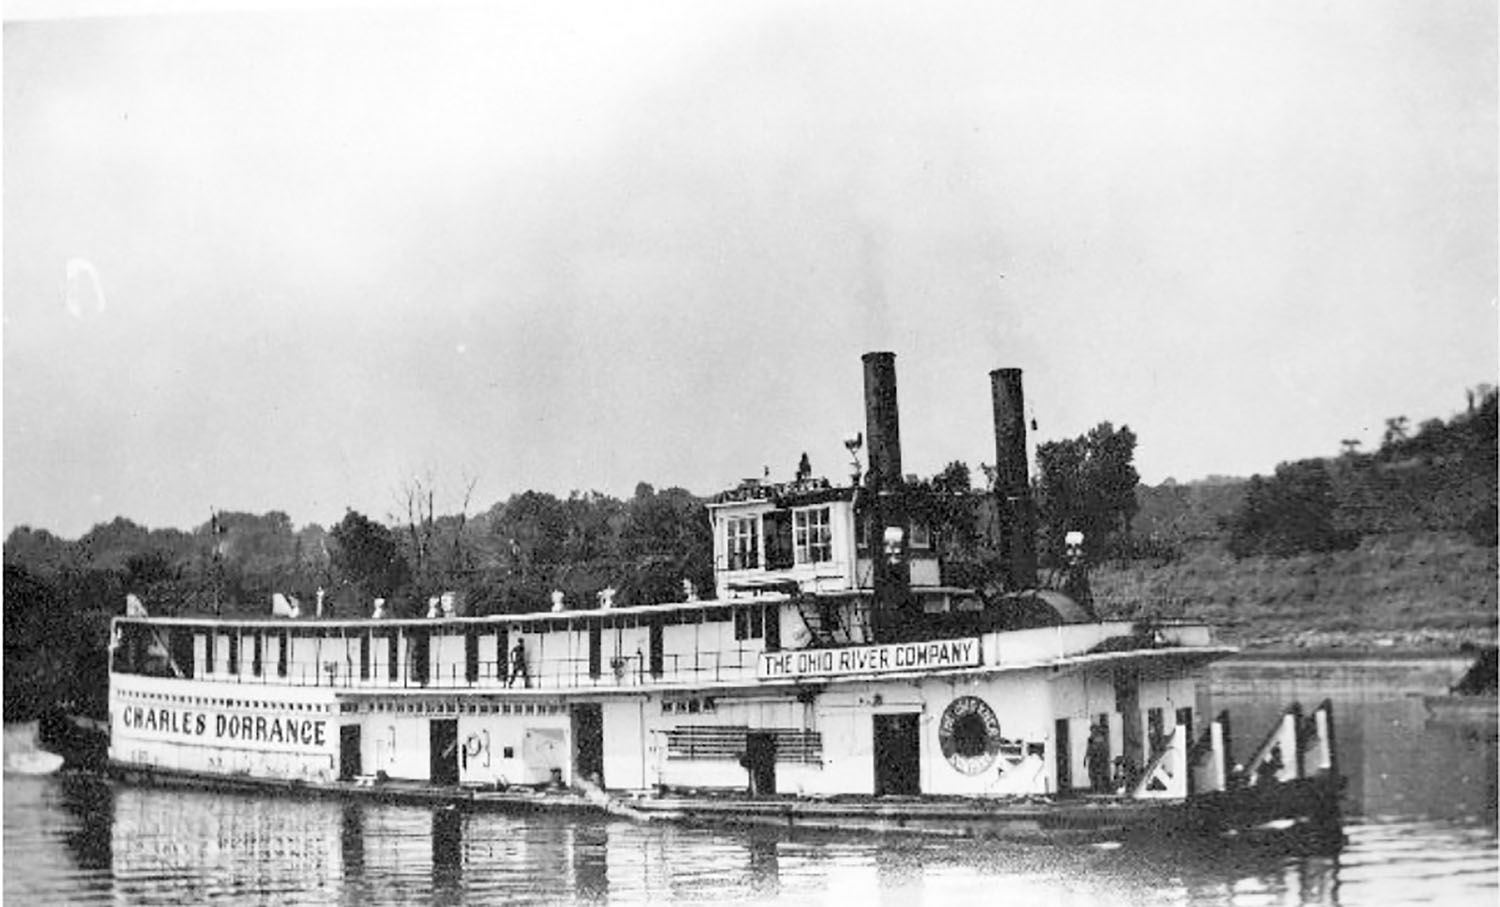 Str. Charles Dorrance of The Ohio River Company. (Dan Owen Boat Photo Museum collection)